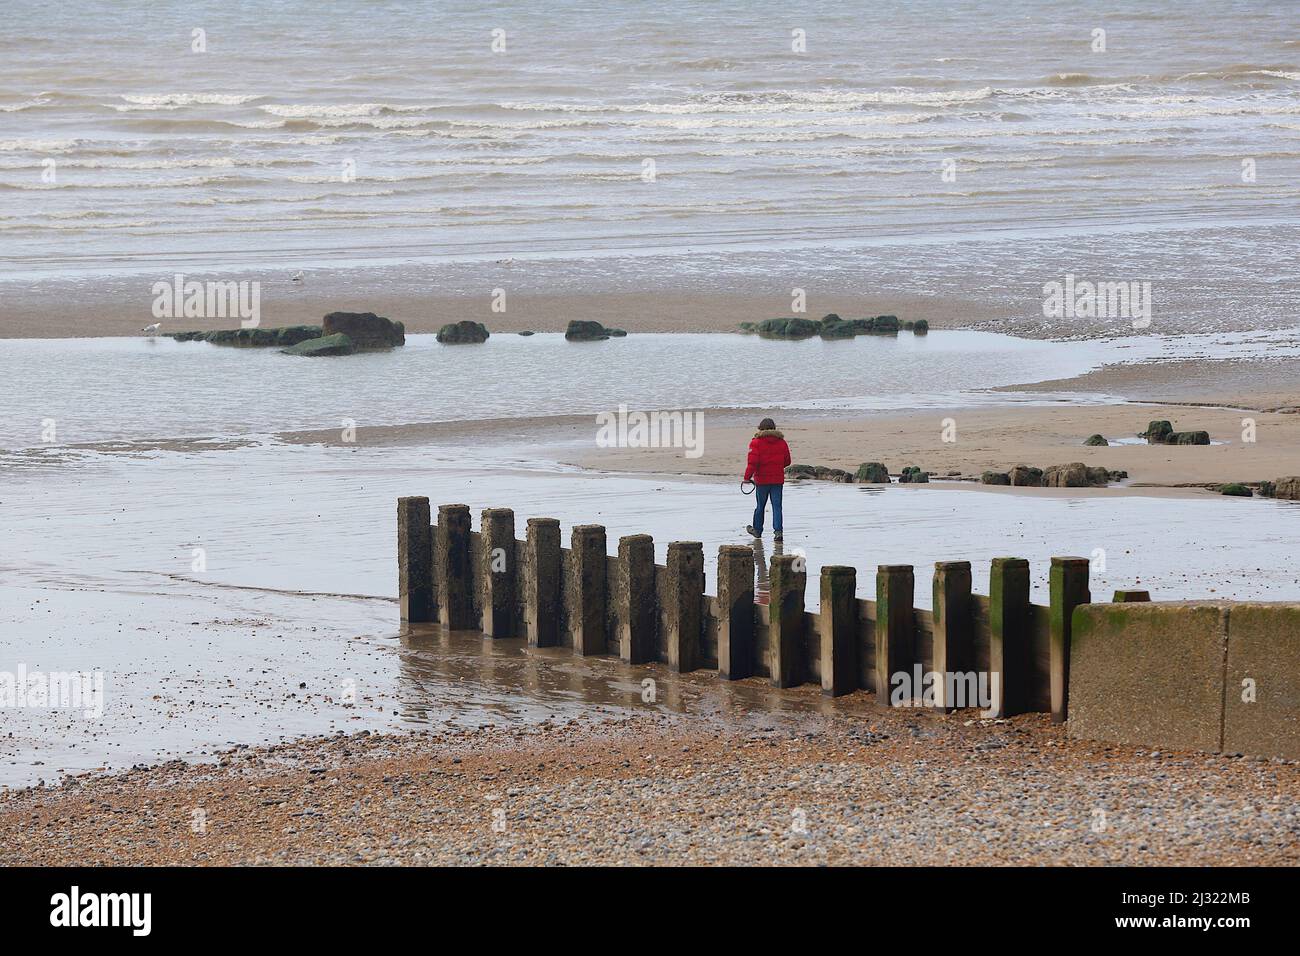 Hastings, East Sussex, UK. 05 Apr, 2022. UK Weather: Sunny morning in the seaside town of Hastings in East Sussex as Brits enjoy walking along the seafront while the tide is out. Photo Credit: Paul Lawrenson /Alamy Live News Stock Photo